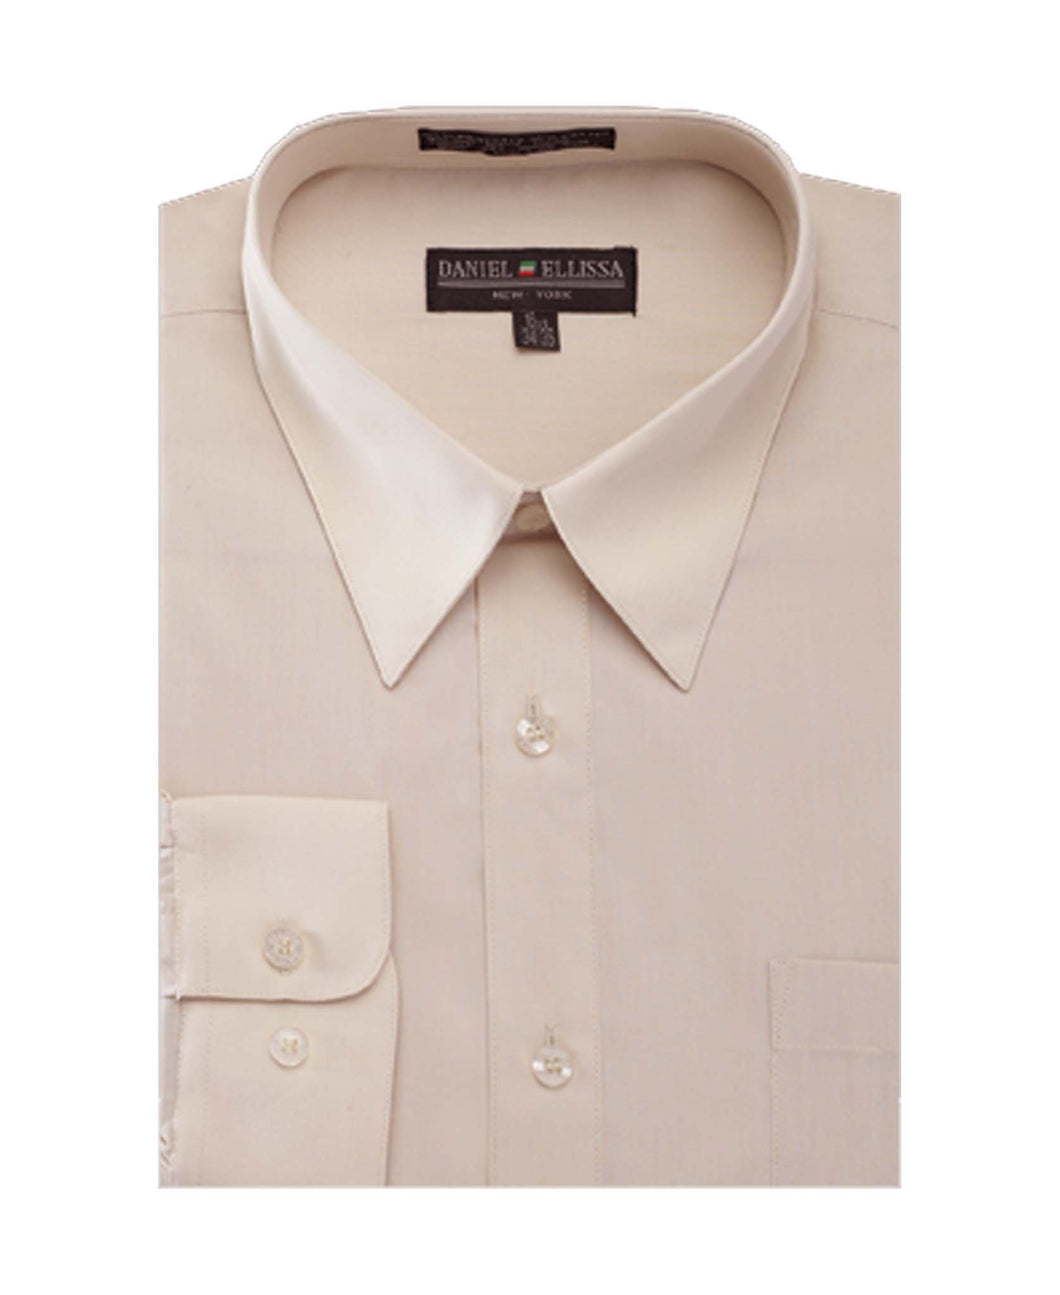 Men's Basic Dress Shirt  with Convertible Cuff -Color BEIGE